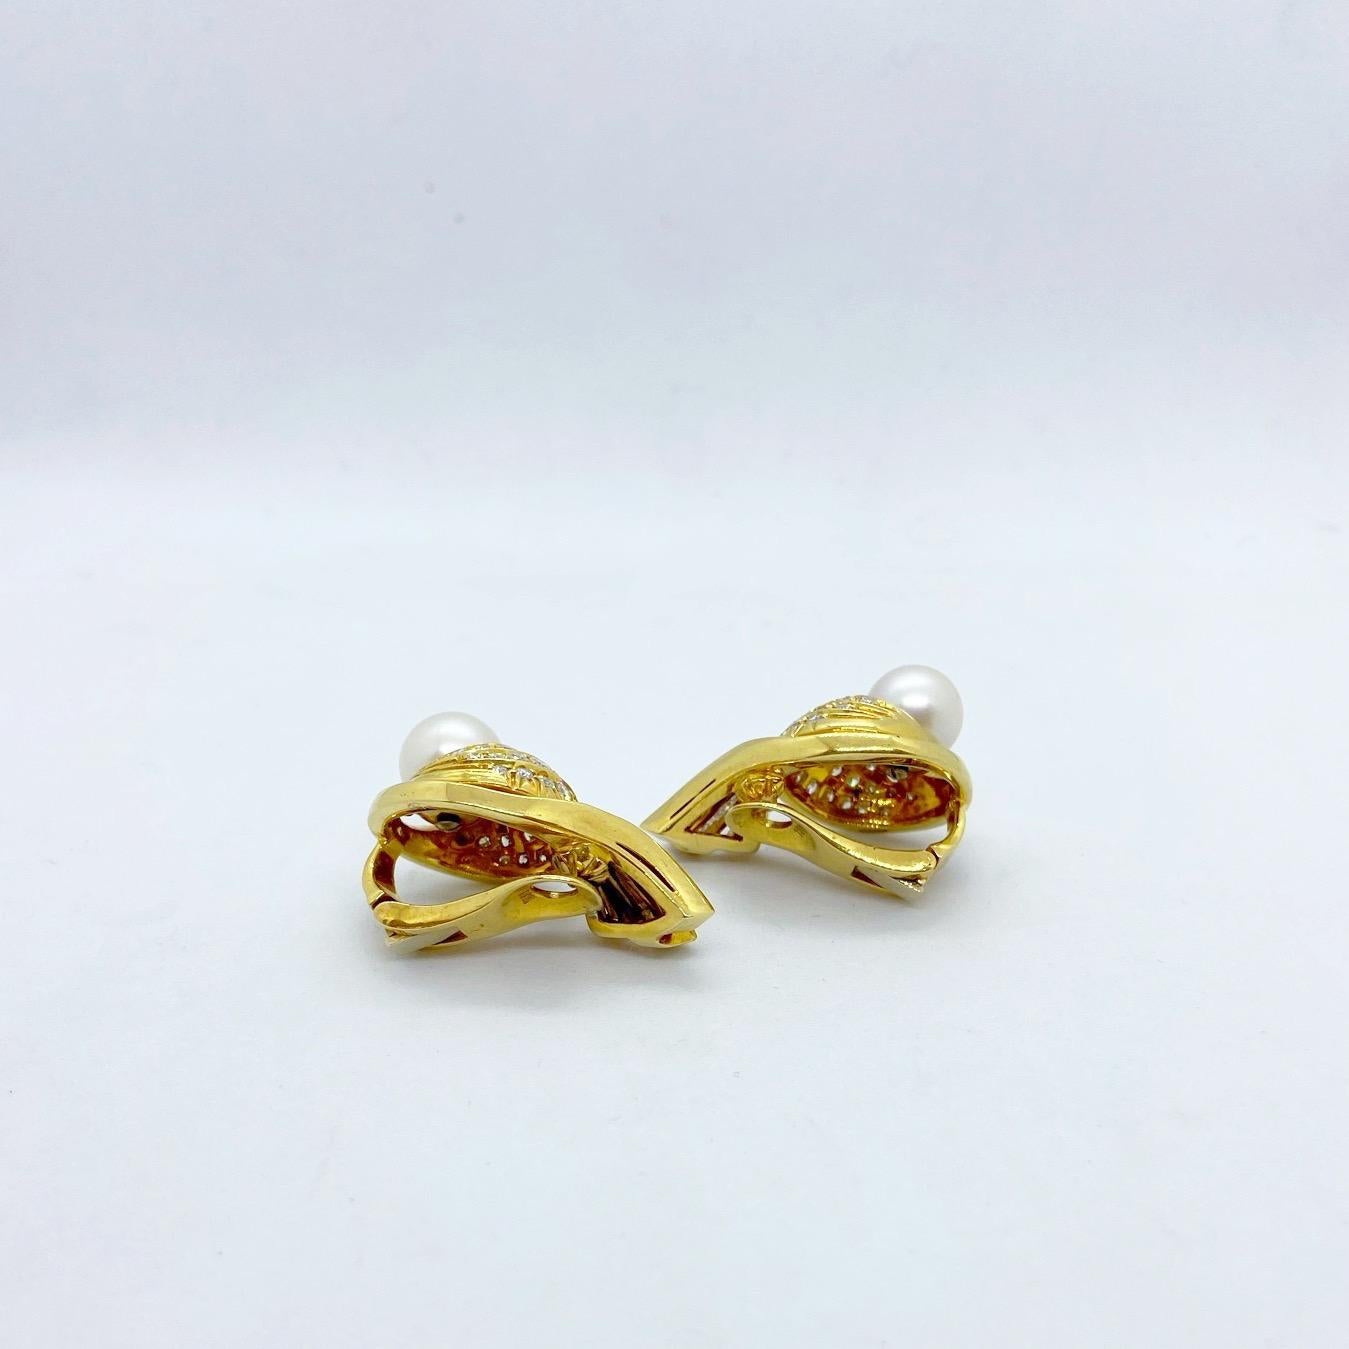 Cellini NYC 18 Karat Gold, Swirl Earrings with 4.06 Carat Diamonds and Pearls For Sale 1